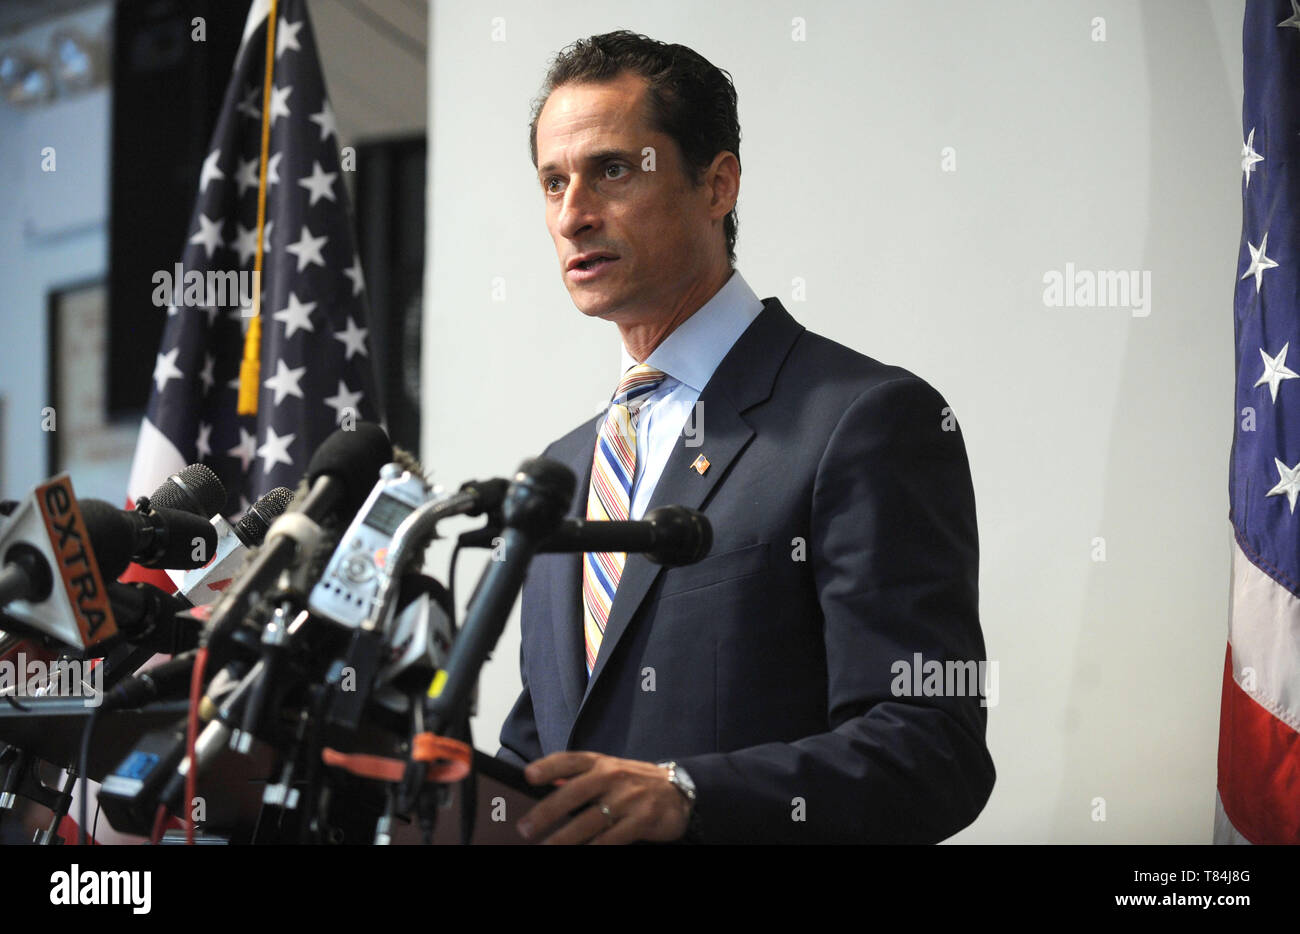 NEW YORK, NY - JUNE 16:  Anthony Weiner speaks to the media during a news conference .  Seared by scandal, New York Rep. Anthony Weiner announced his resignation from Congress on Thursday, done in by lewd photos he took of himself, sent to women online and then adamantly lied about after being caught.  'I'm here today to again apologize for the personal mistakes I have made and the embarrassment I have caused,' he said reading from a brief statement in Brooklyn. on June 16, 2011 in New York City.  People:  Anthony Weiner Stock Photo